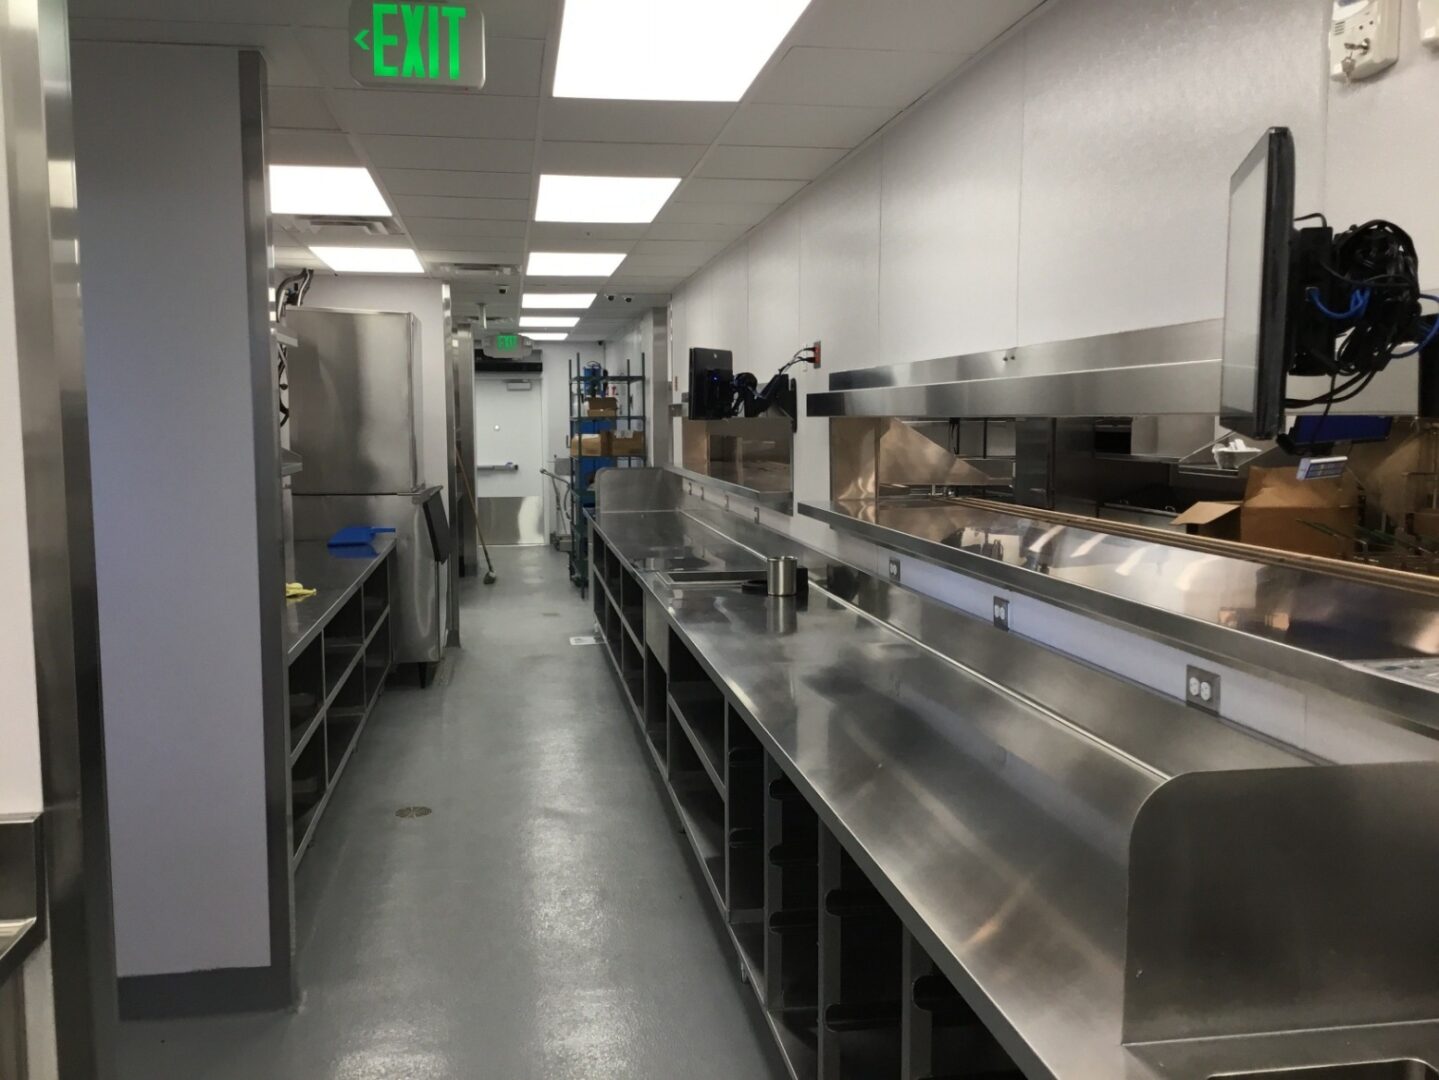 Picture of hotel kitchen